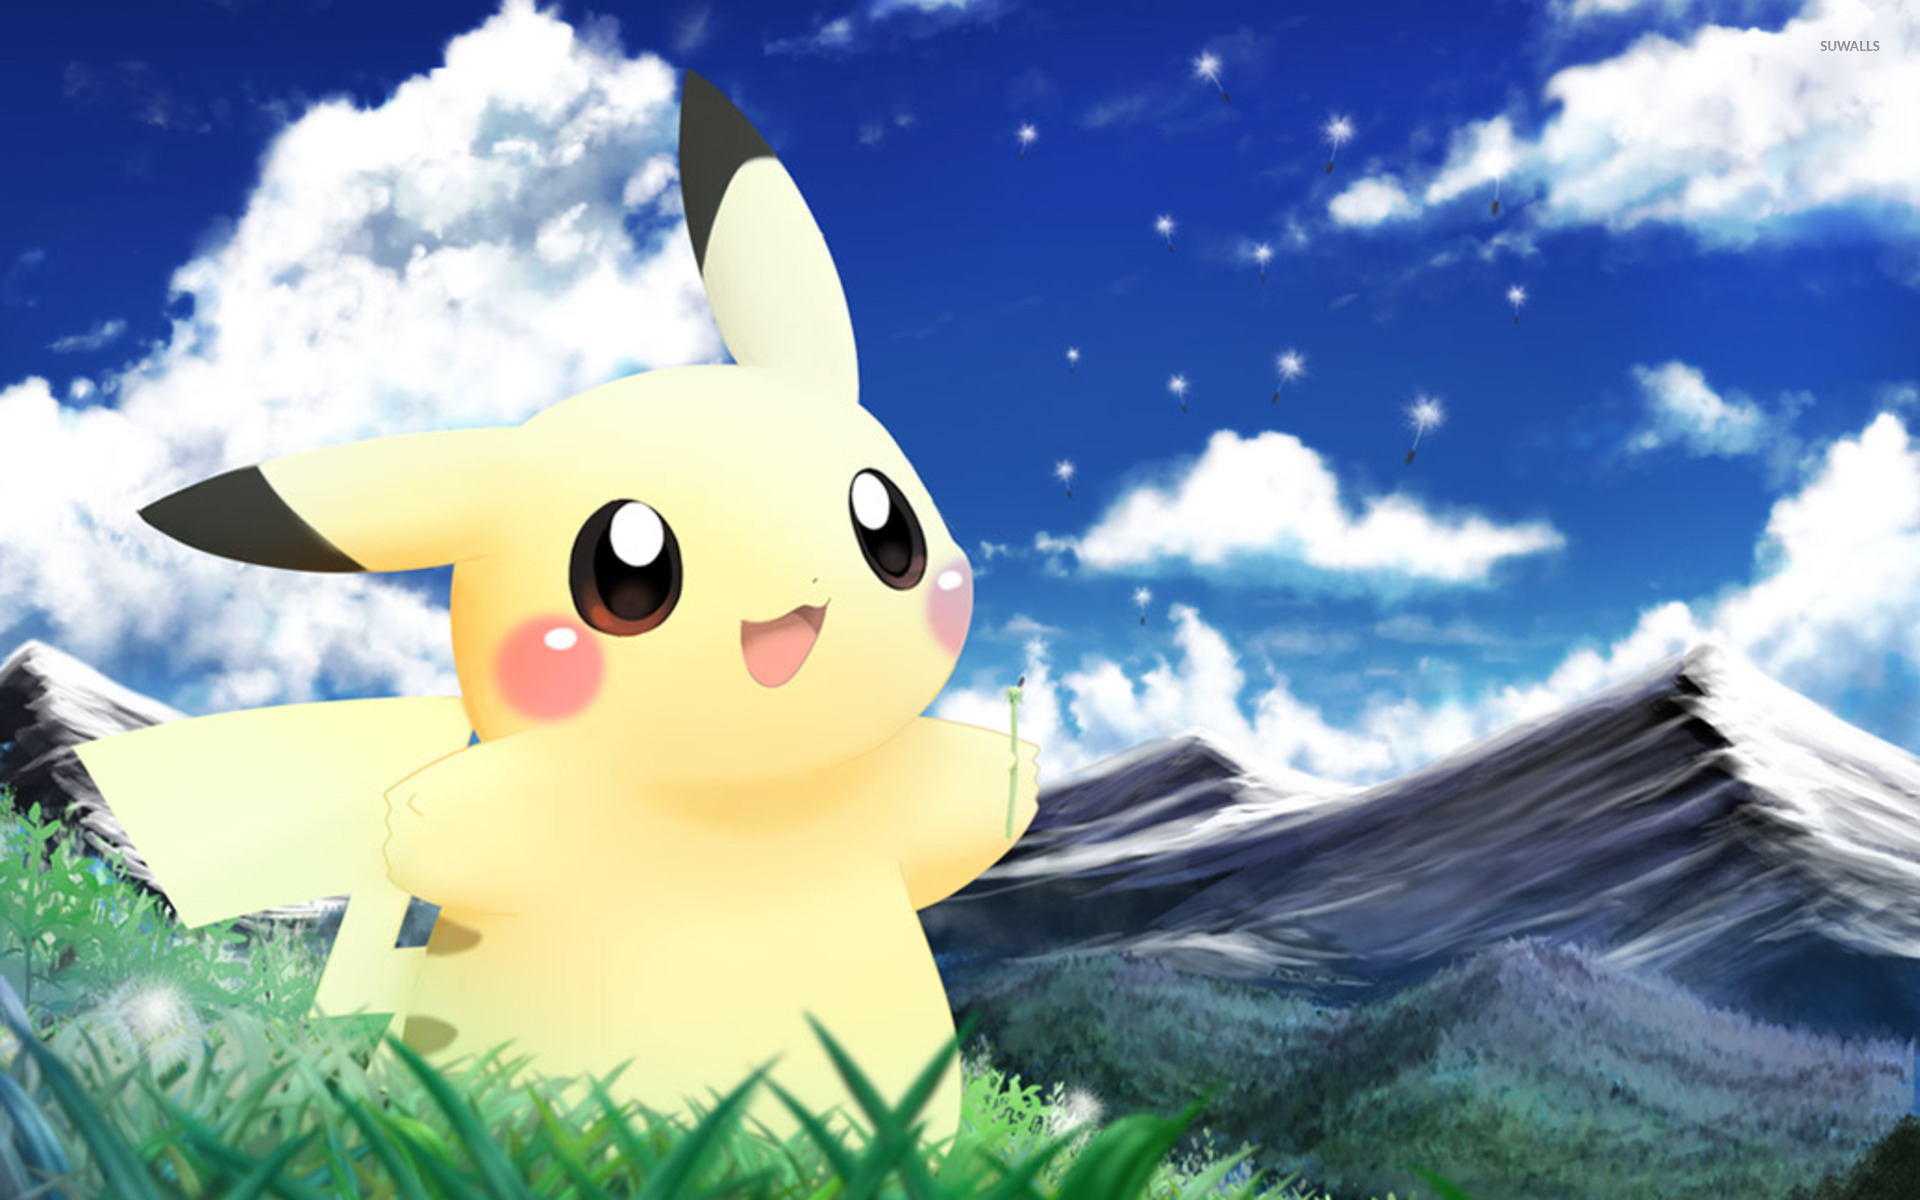 Ash Ketchum And Pikachu's Time In The Pokémon Anime Is Coming To An End |  Nintendo Life